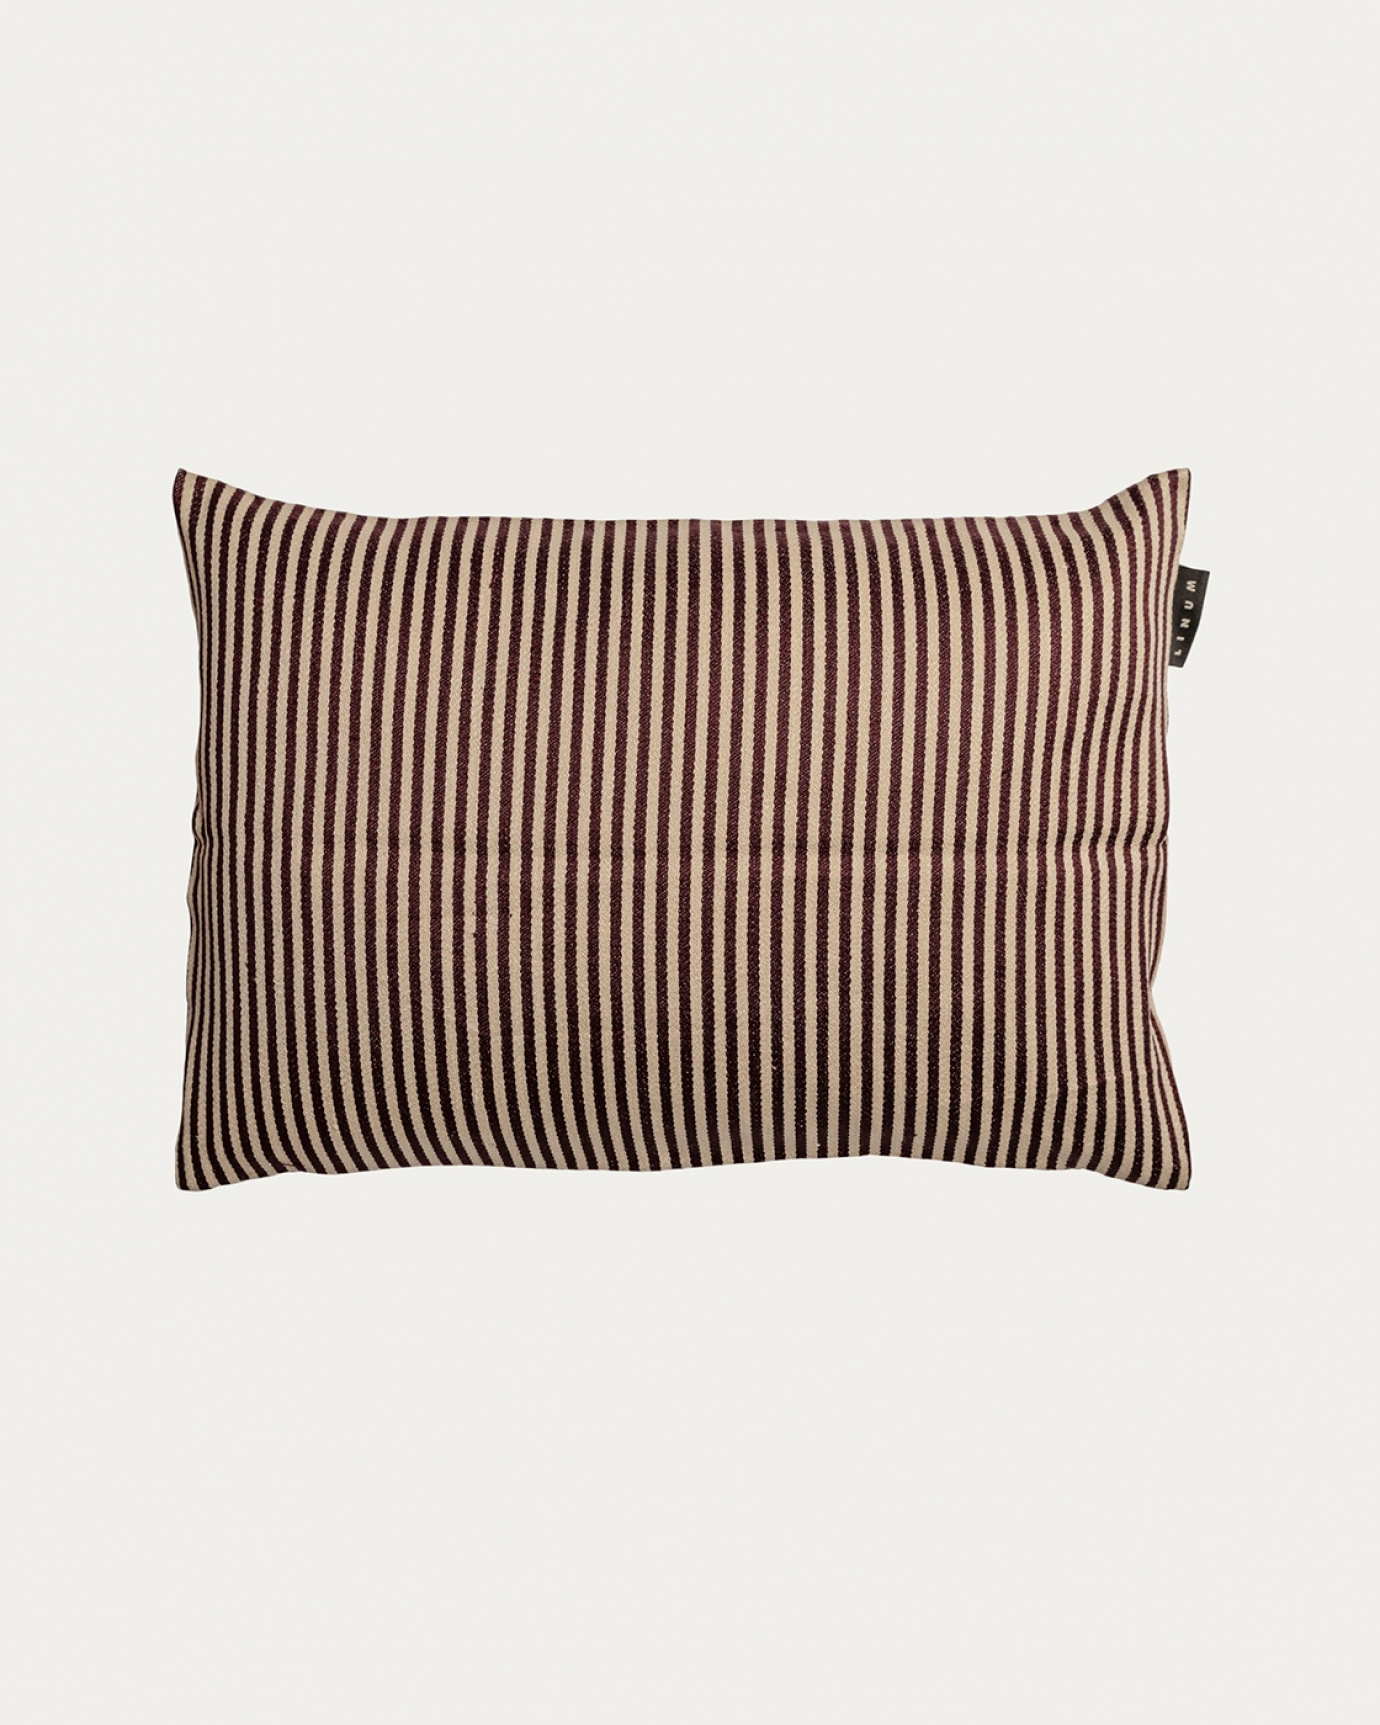 Product image dark burgundy red CALCIO cushion cover with thin stripes of 77% linen and 23% cotton from LINUM DESIGN. Size 35x50 cm.